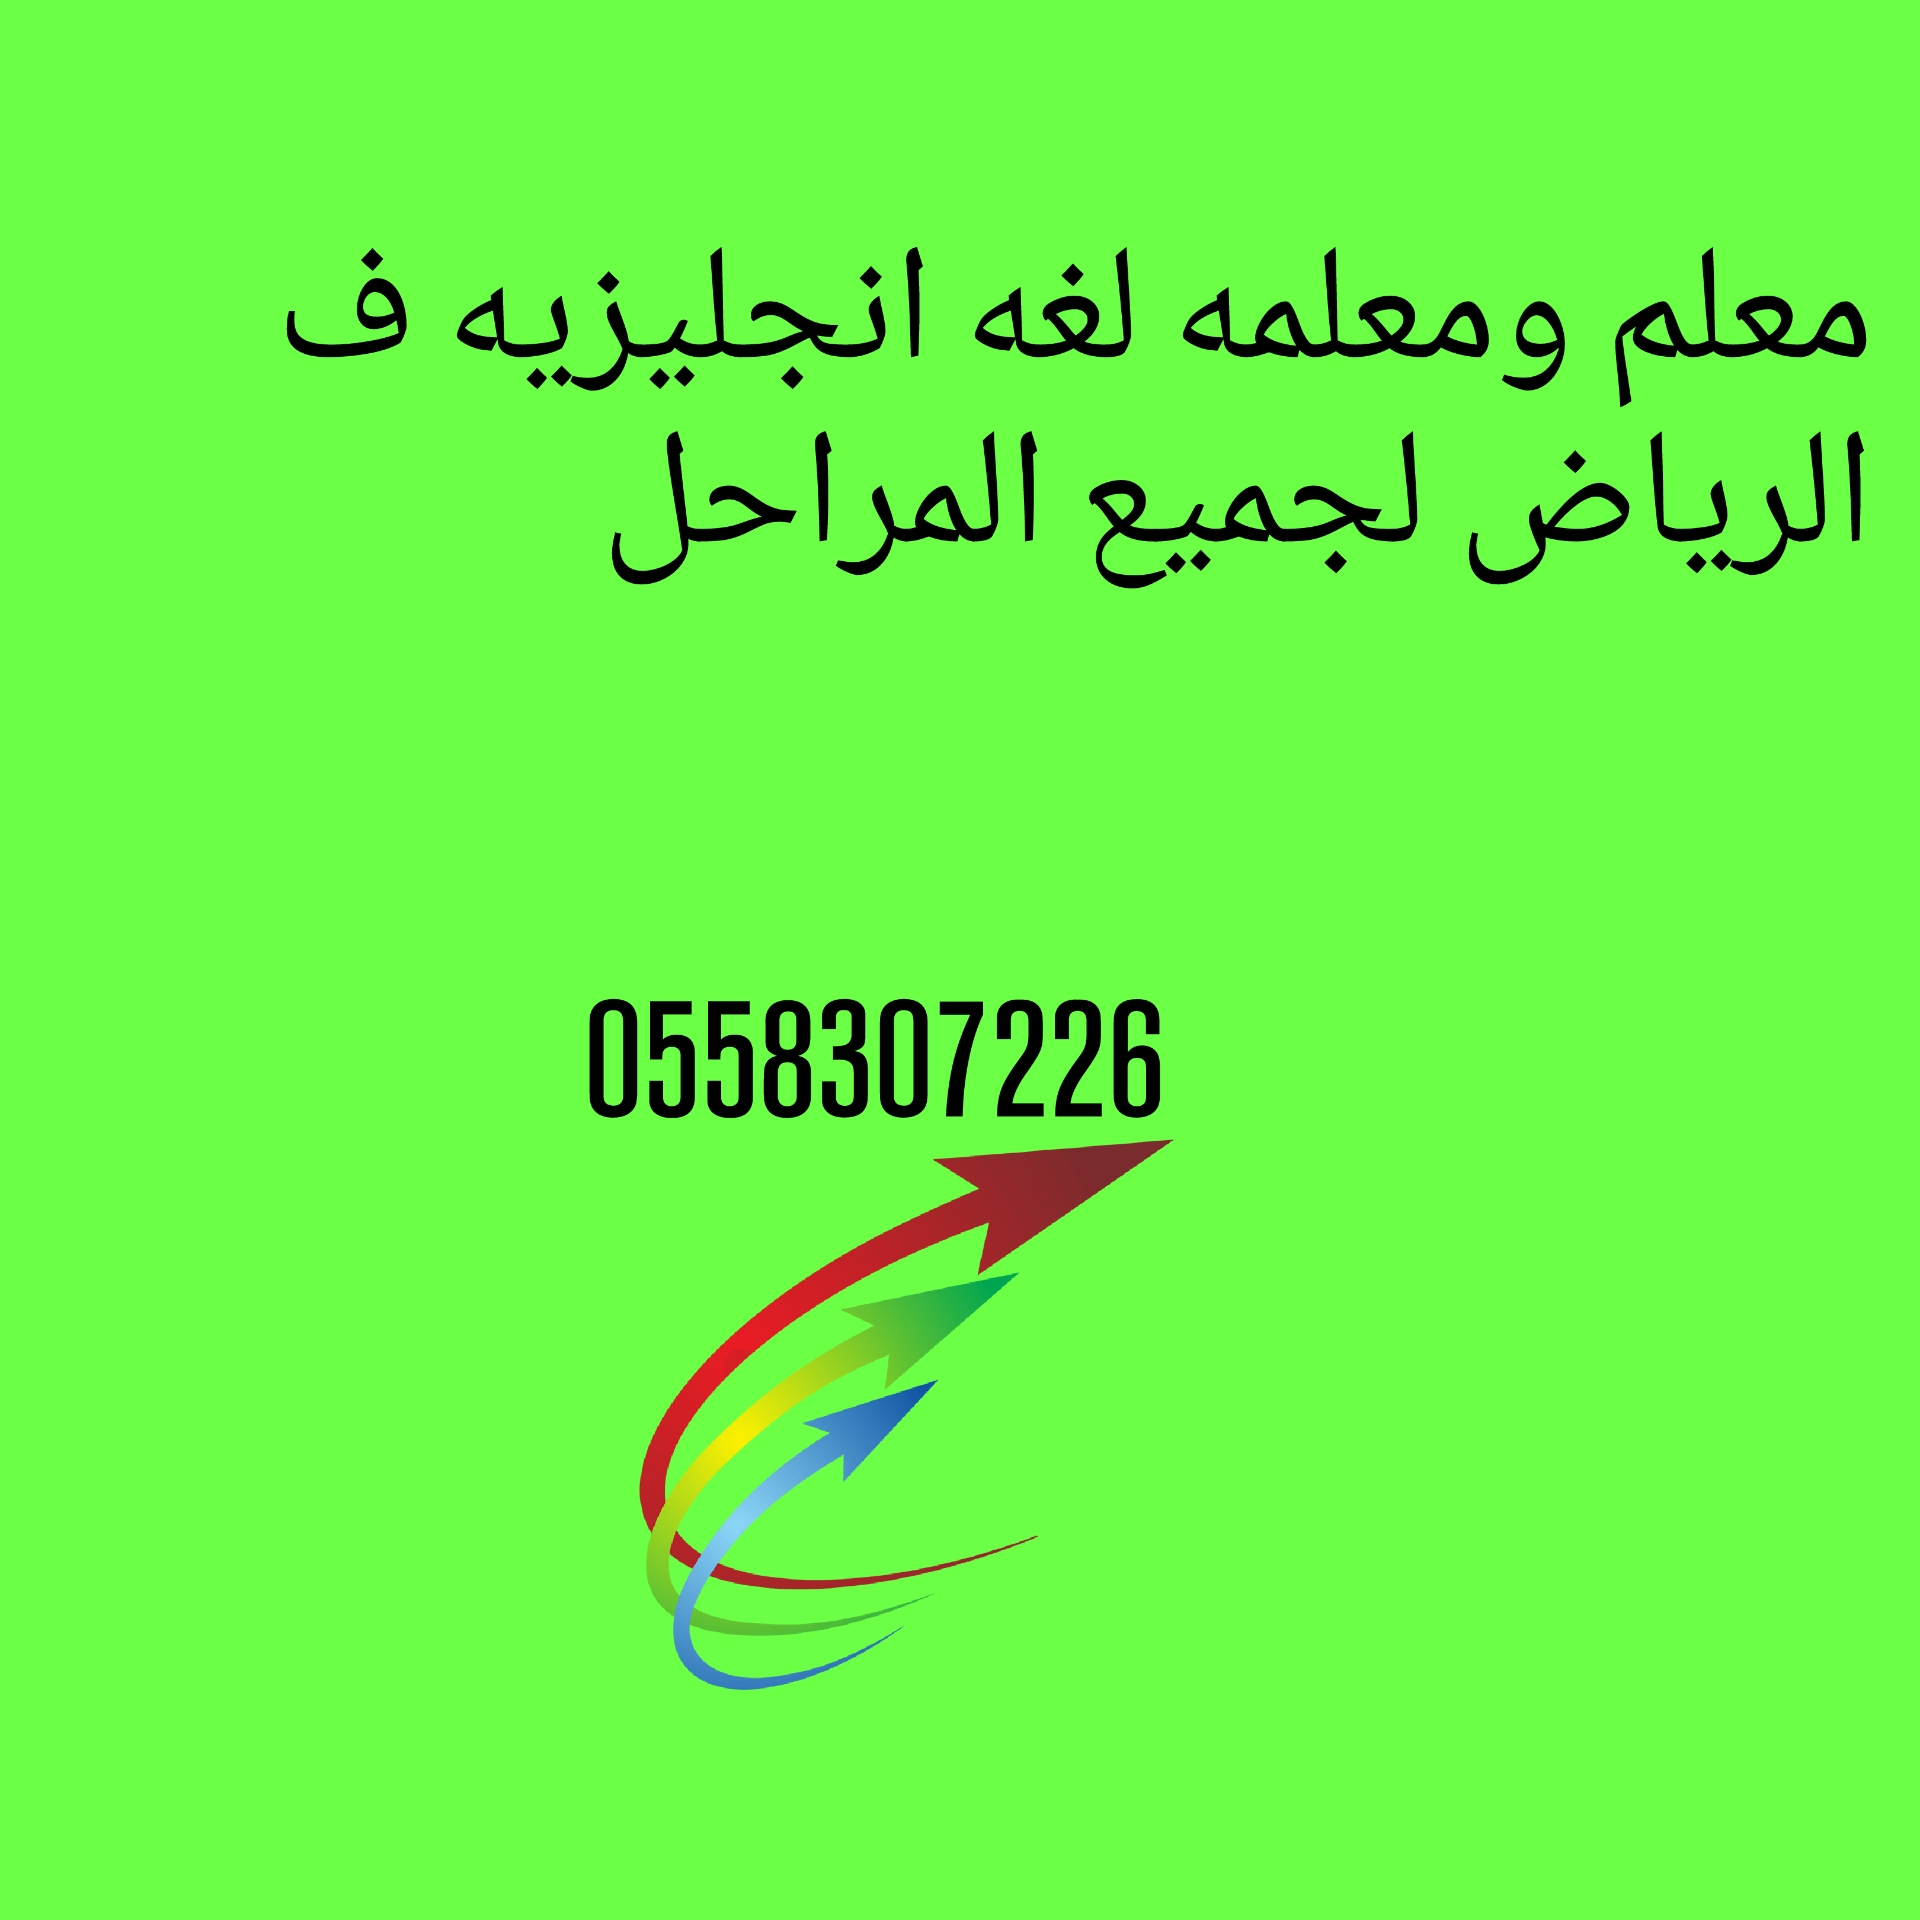 Welcomed to STANDARD ONLINE FINANCE LTD we give out secured & unsecured Guarantee loans to Business Men and women who are into Business transaction standard-  معلمه ومعلم لغه انجليزيه...